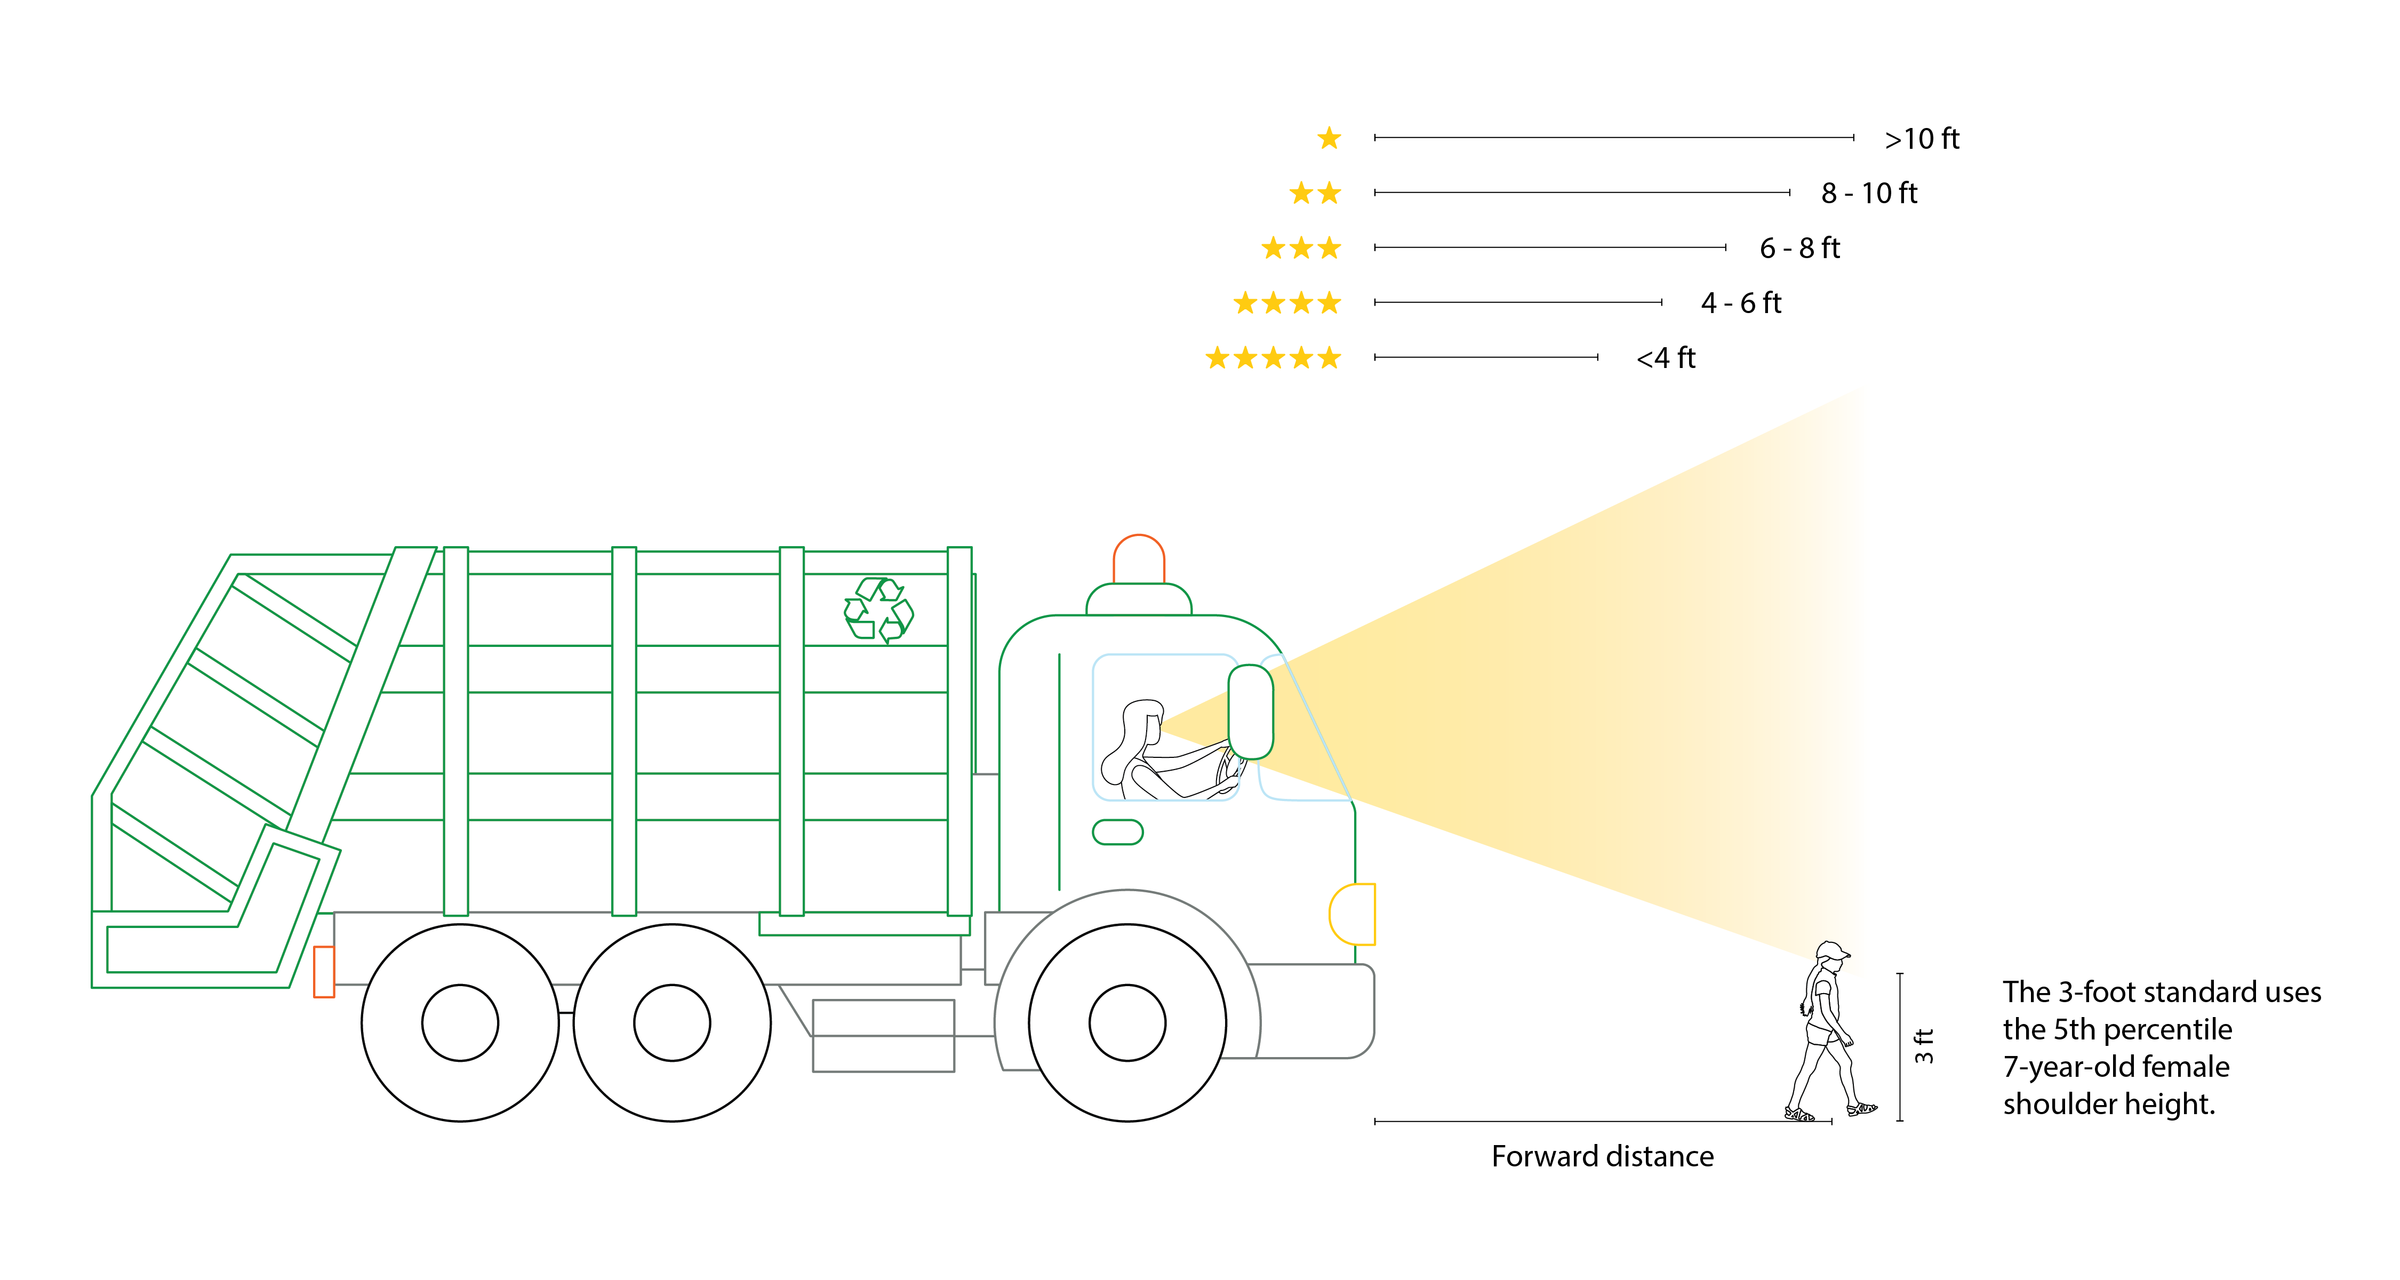 Vehicle direct vision and rating from the forward distance